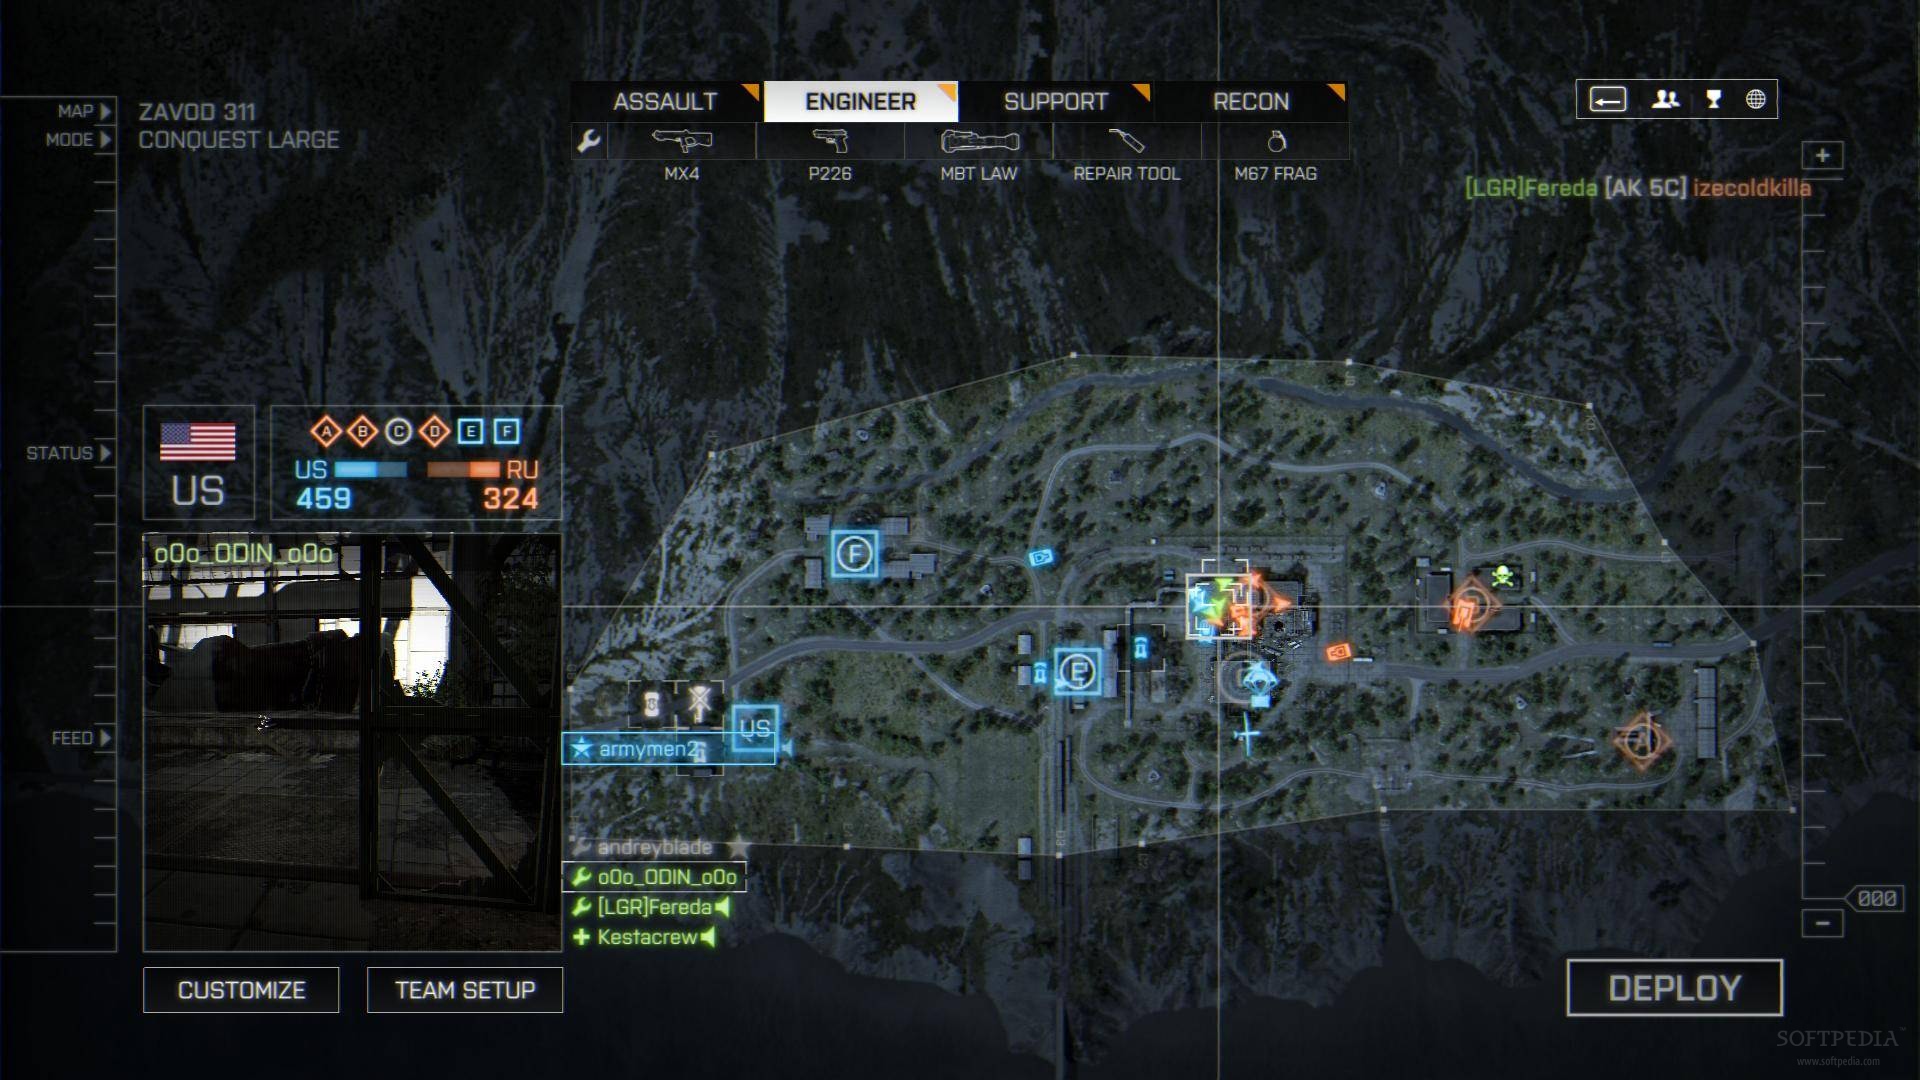 Battlefield 4 PC Server Update (R10) Rolling Out, Fixes Crashes